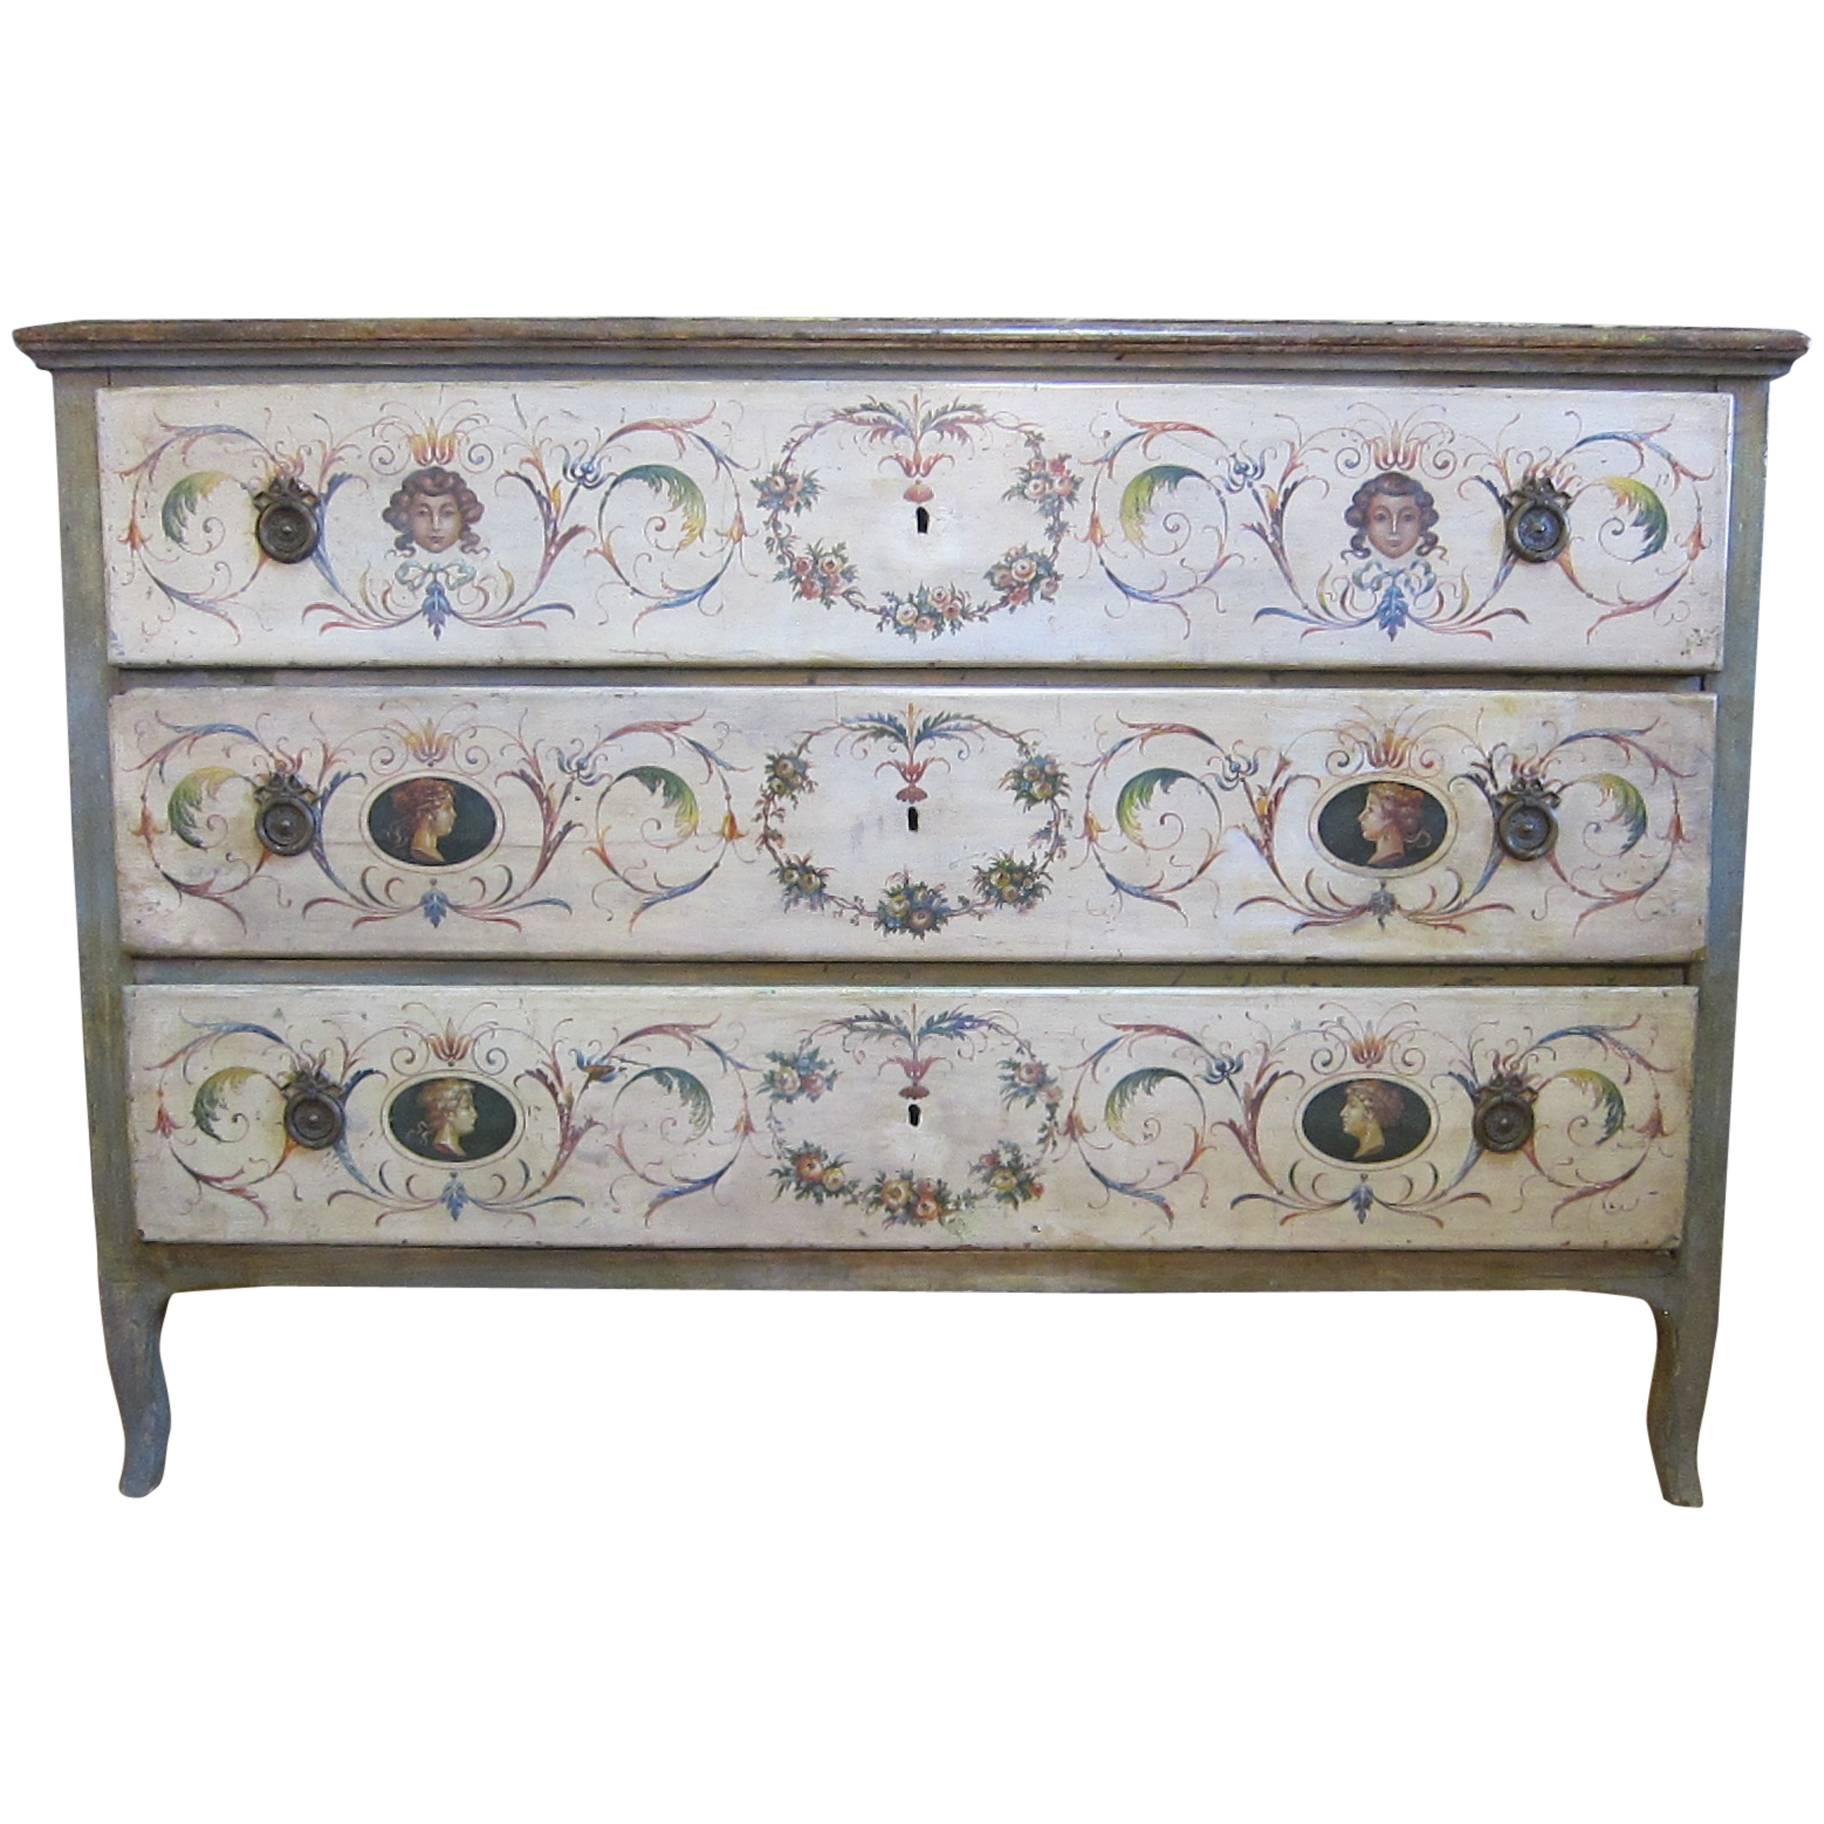 19th Century Italian Painted Chest of Drawers